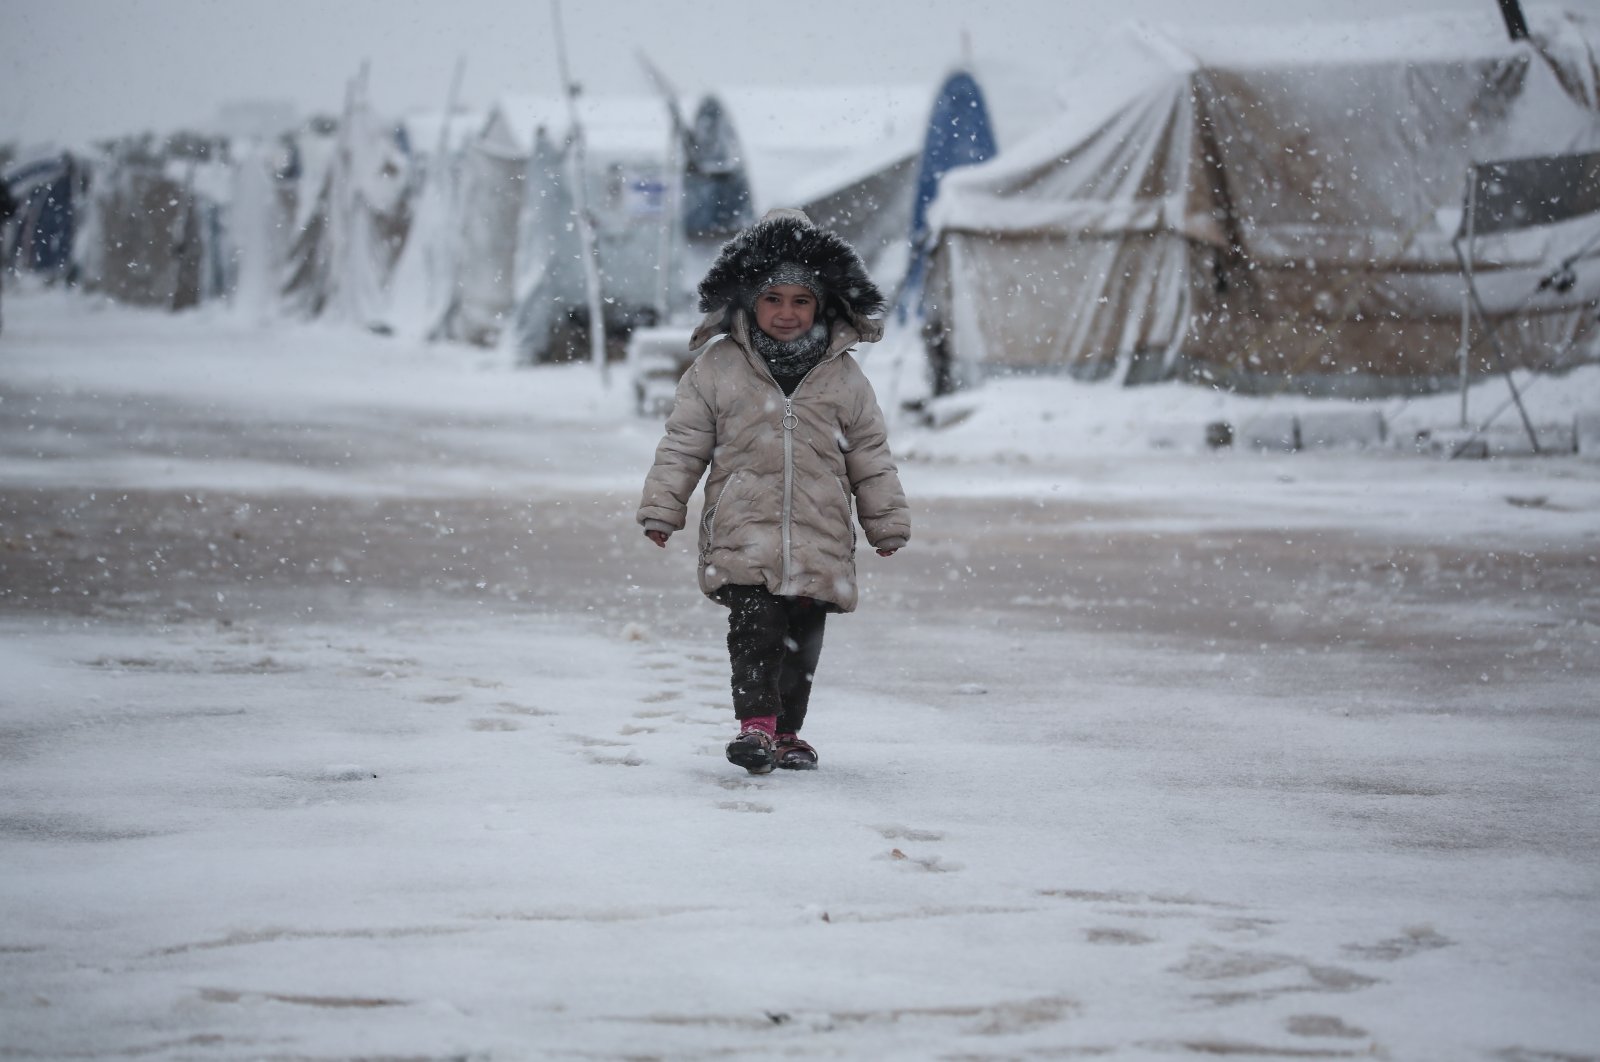 Syria Today – Russia Pushes for Rapprochement; EU Relunctant; Snowfall Hits IDPs